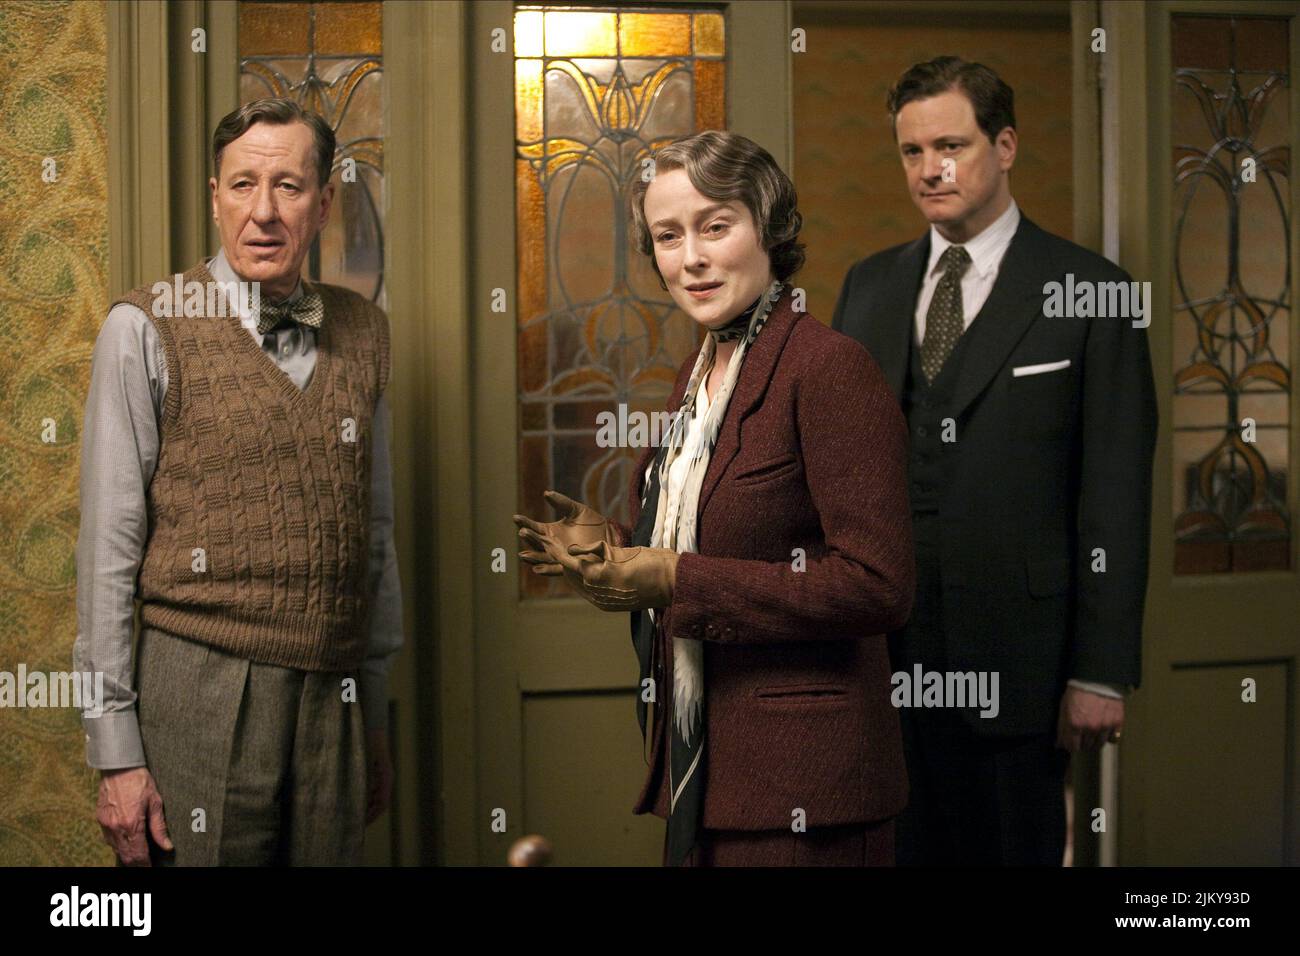 RUSH,EHLE,FIRTH, THE KING'S SPEECH, 2010 Stock Photo